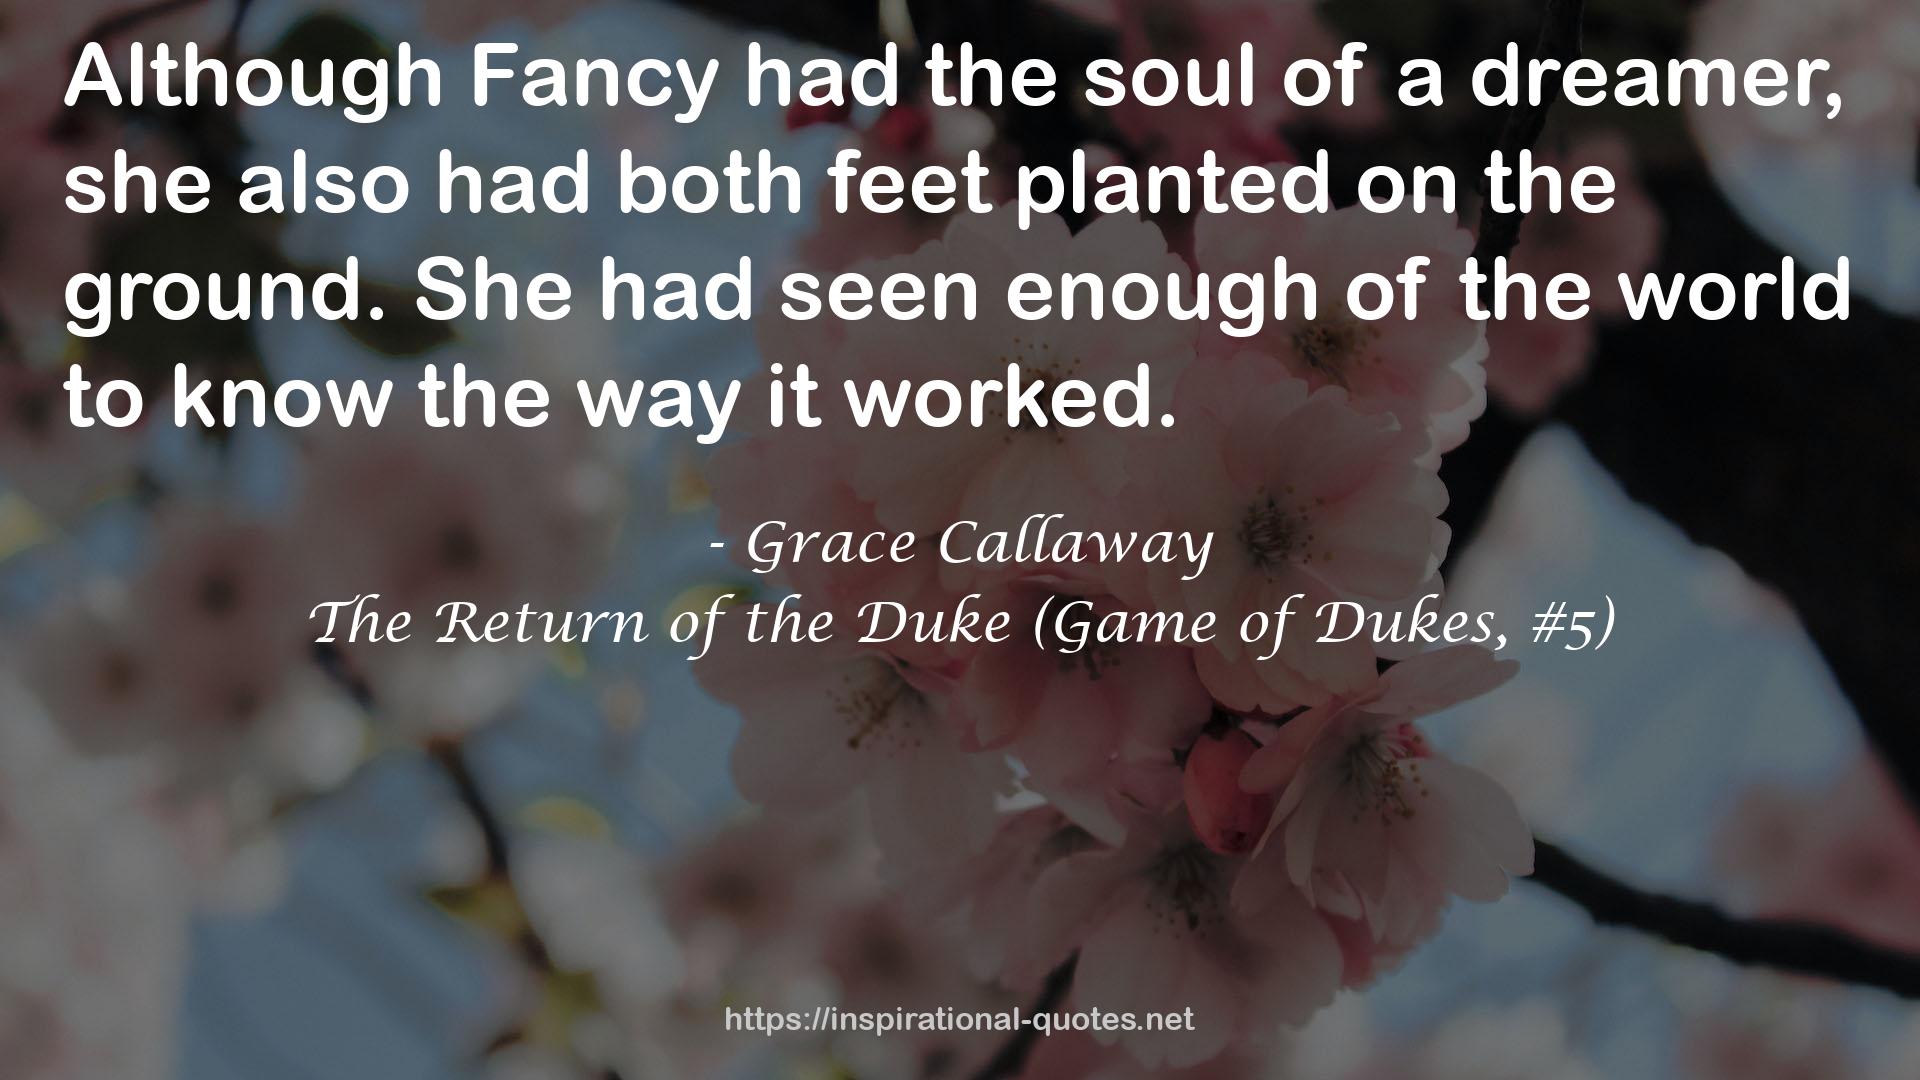 The Return of the Duke (Game of Dukes, #5) QUOTES